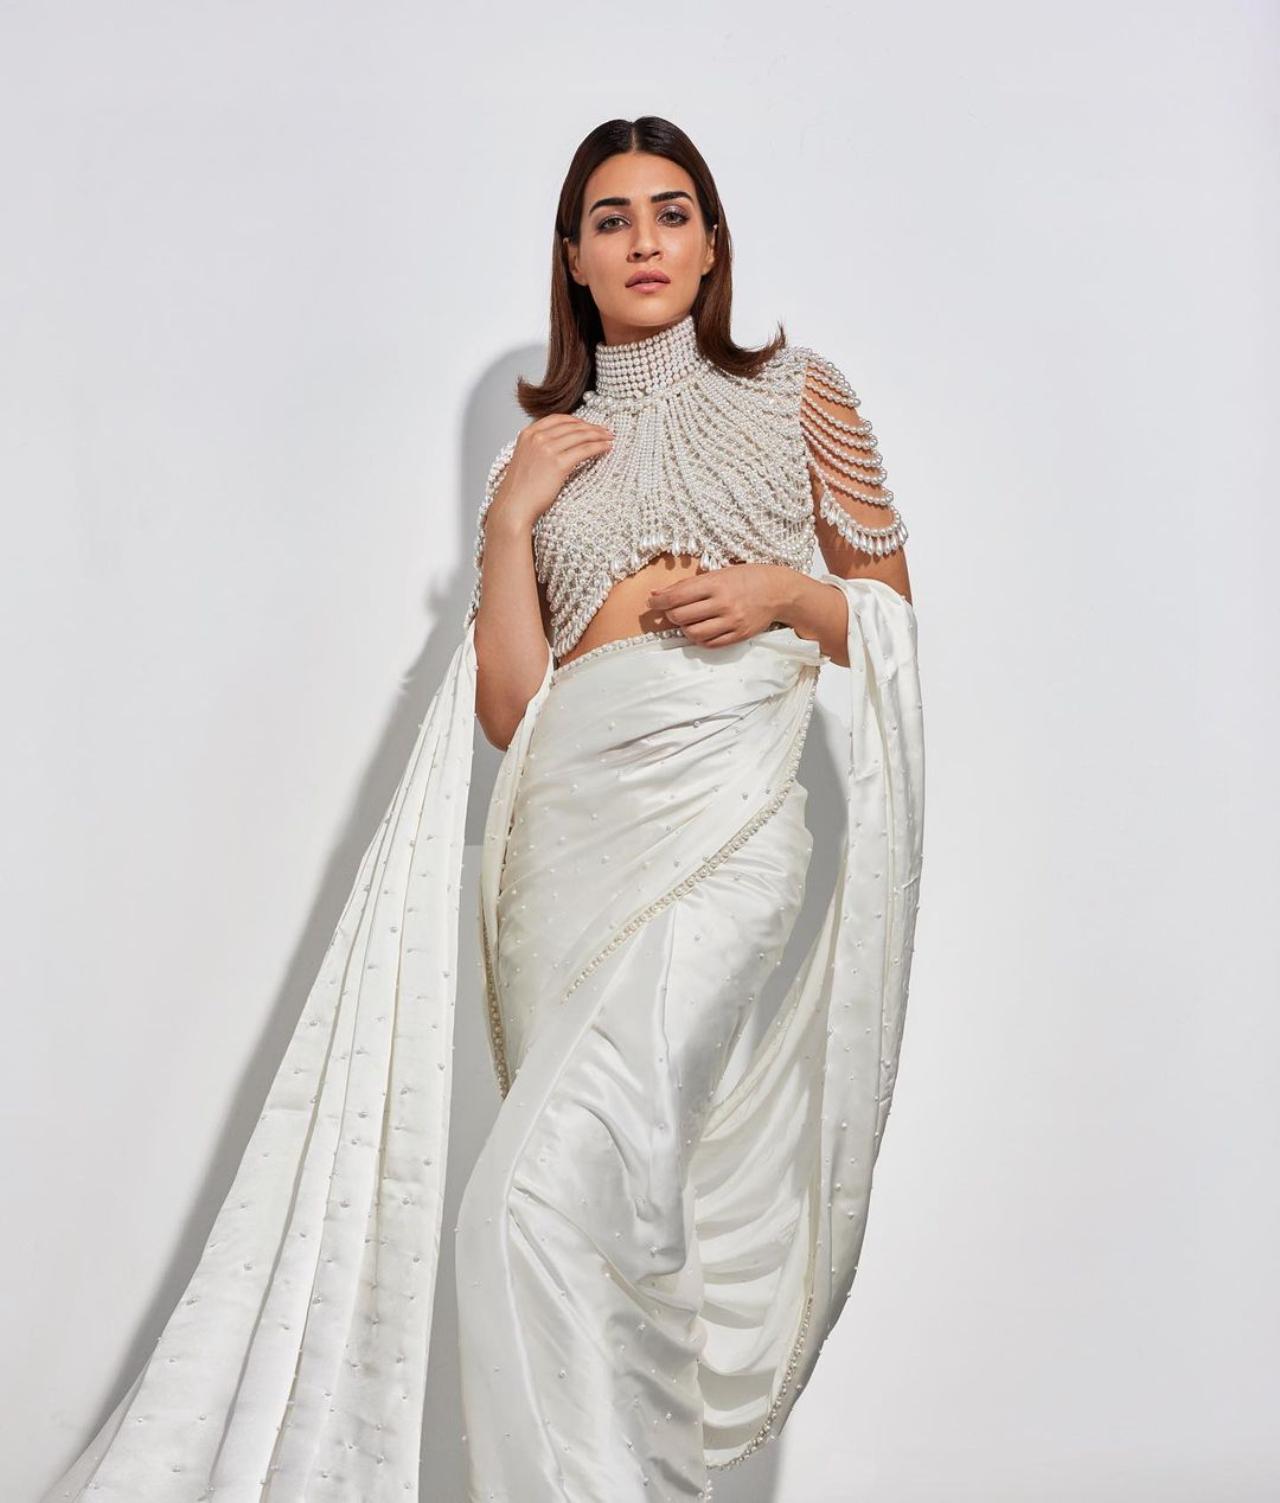 Apart from speaking volumes with her performance in films, Kriti Sanon has also been making a mark with her fashion choices. Recently, the actress stunned in a vinatge saree look